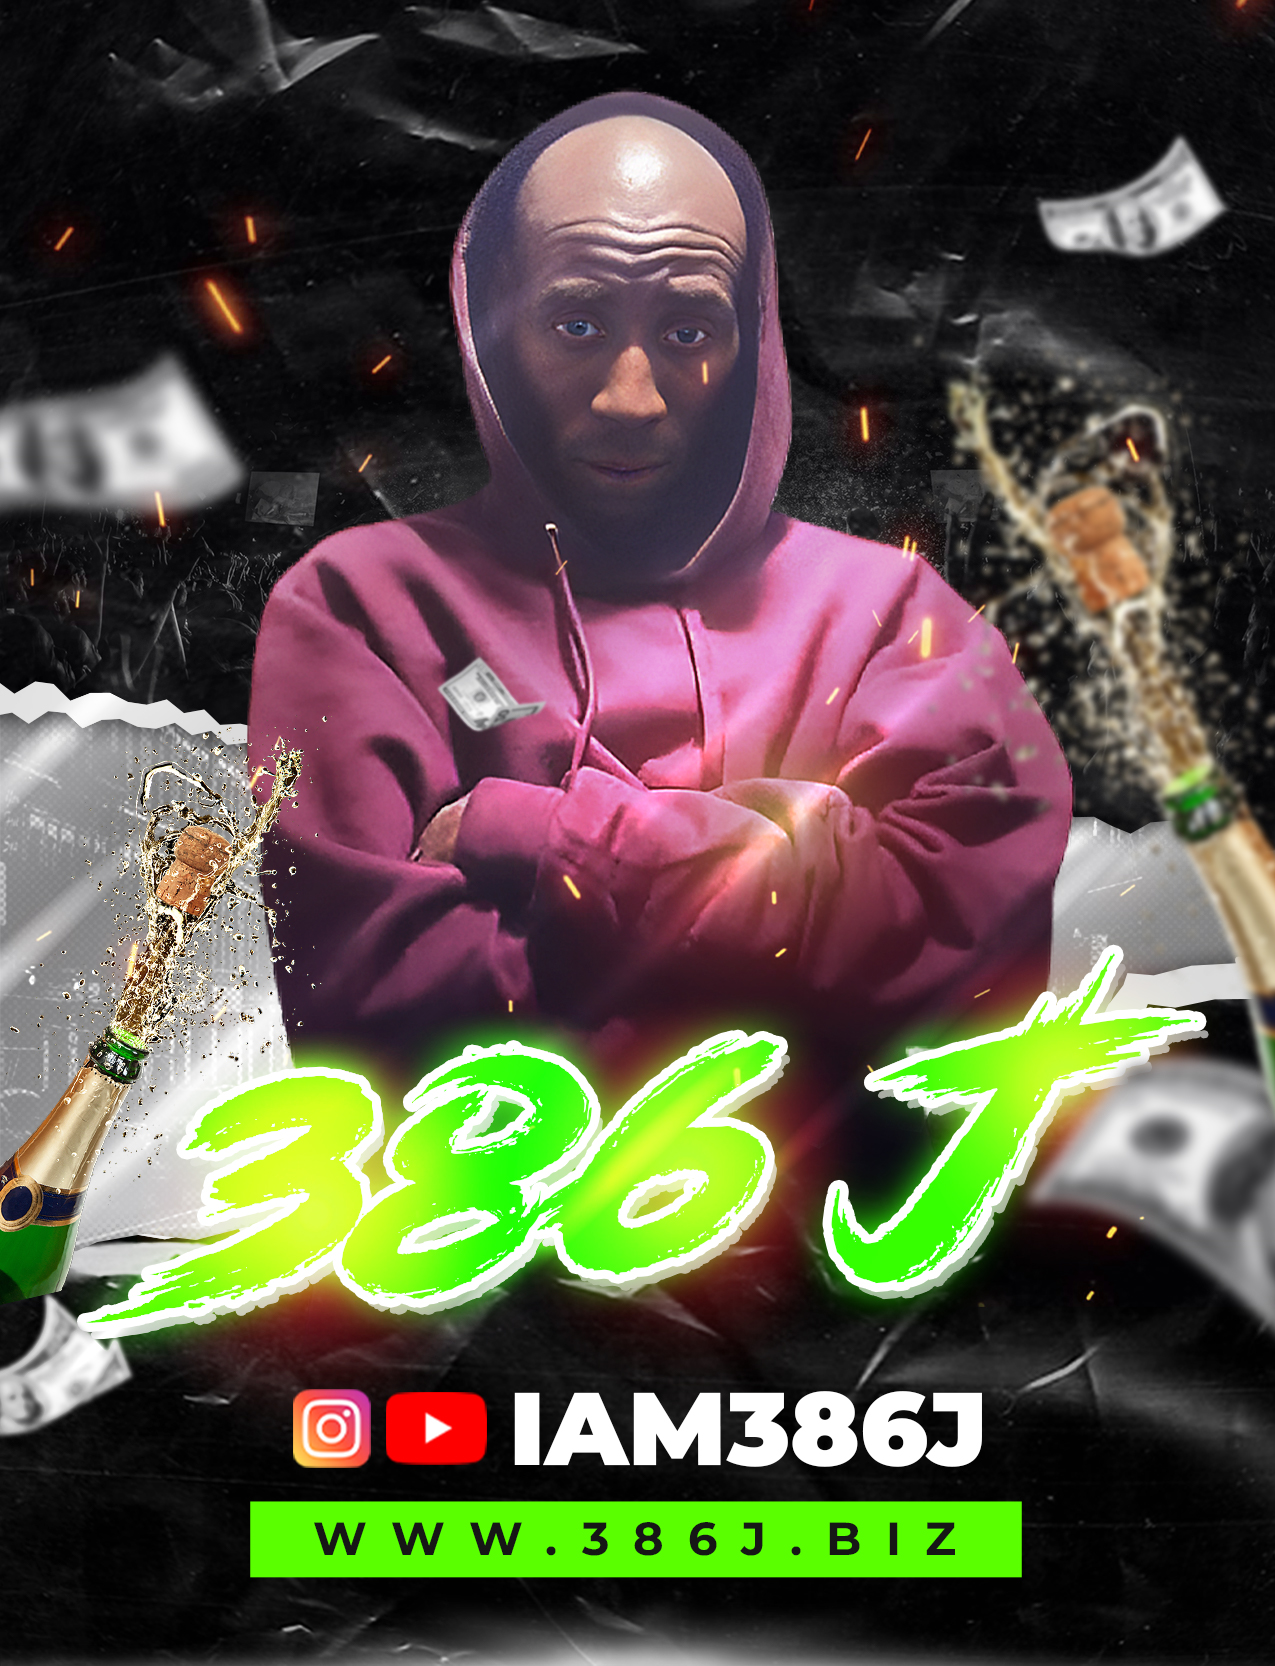 Interview with 386j